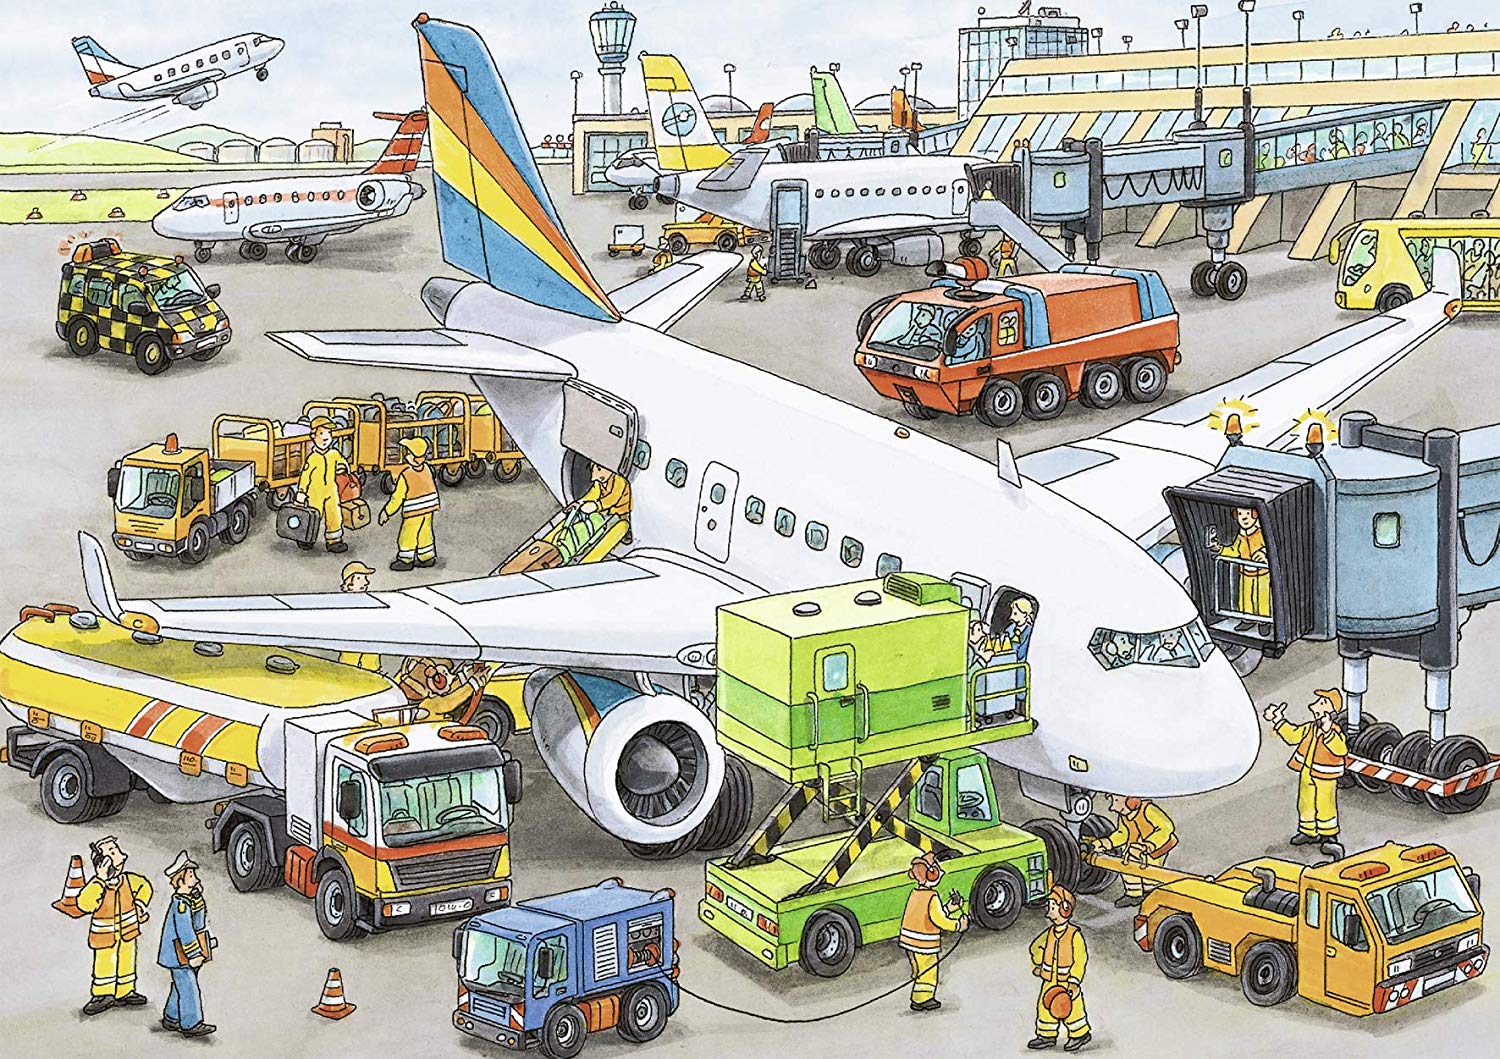 Ravensburger Busy Airport Puzzle 35pc